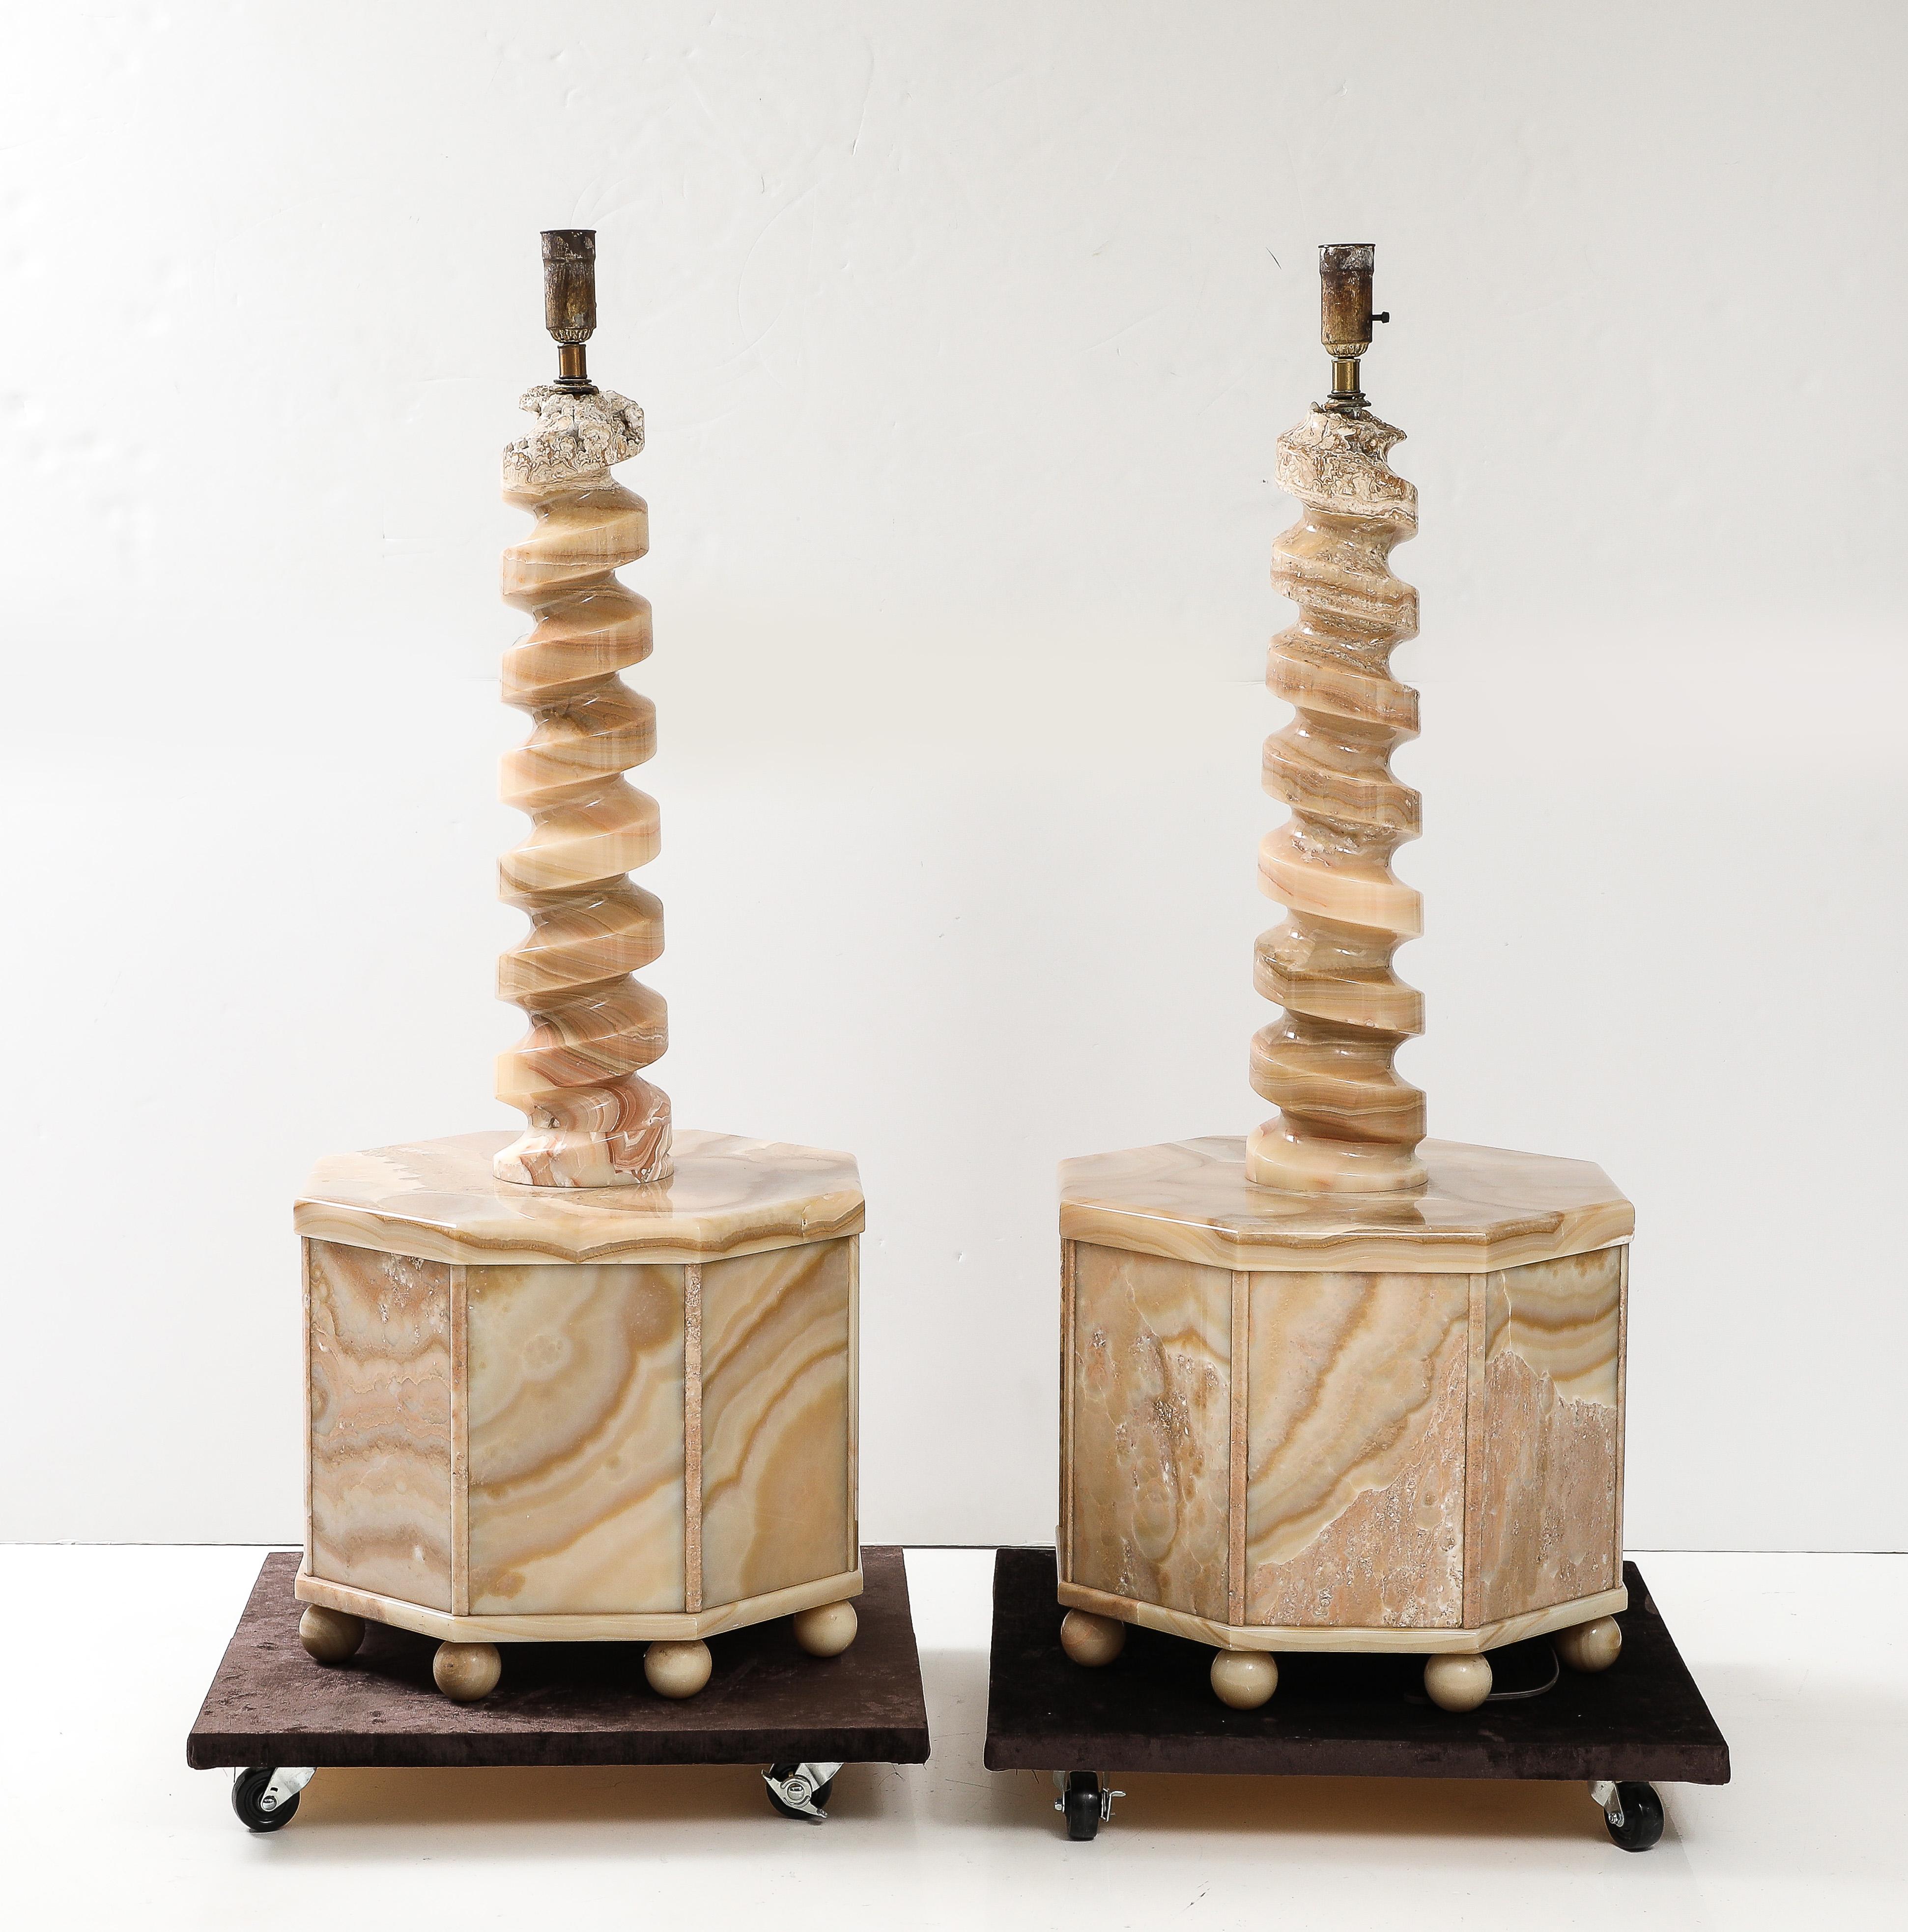 Spectacular pair of Monumental polished Onyx floor Lamps.
The Pair of Octagonal table bases sit on Onyx Balls  and support  beautiful crafted corkscrew columns with single Mogul light sockets that have been Newly rewired.
The table bases have